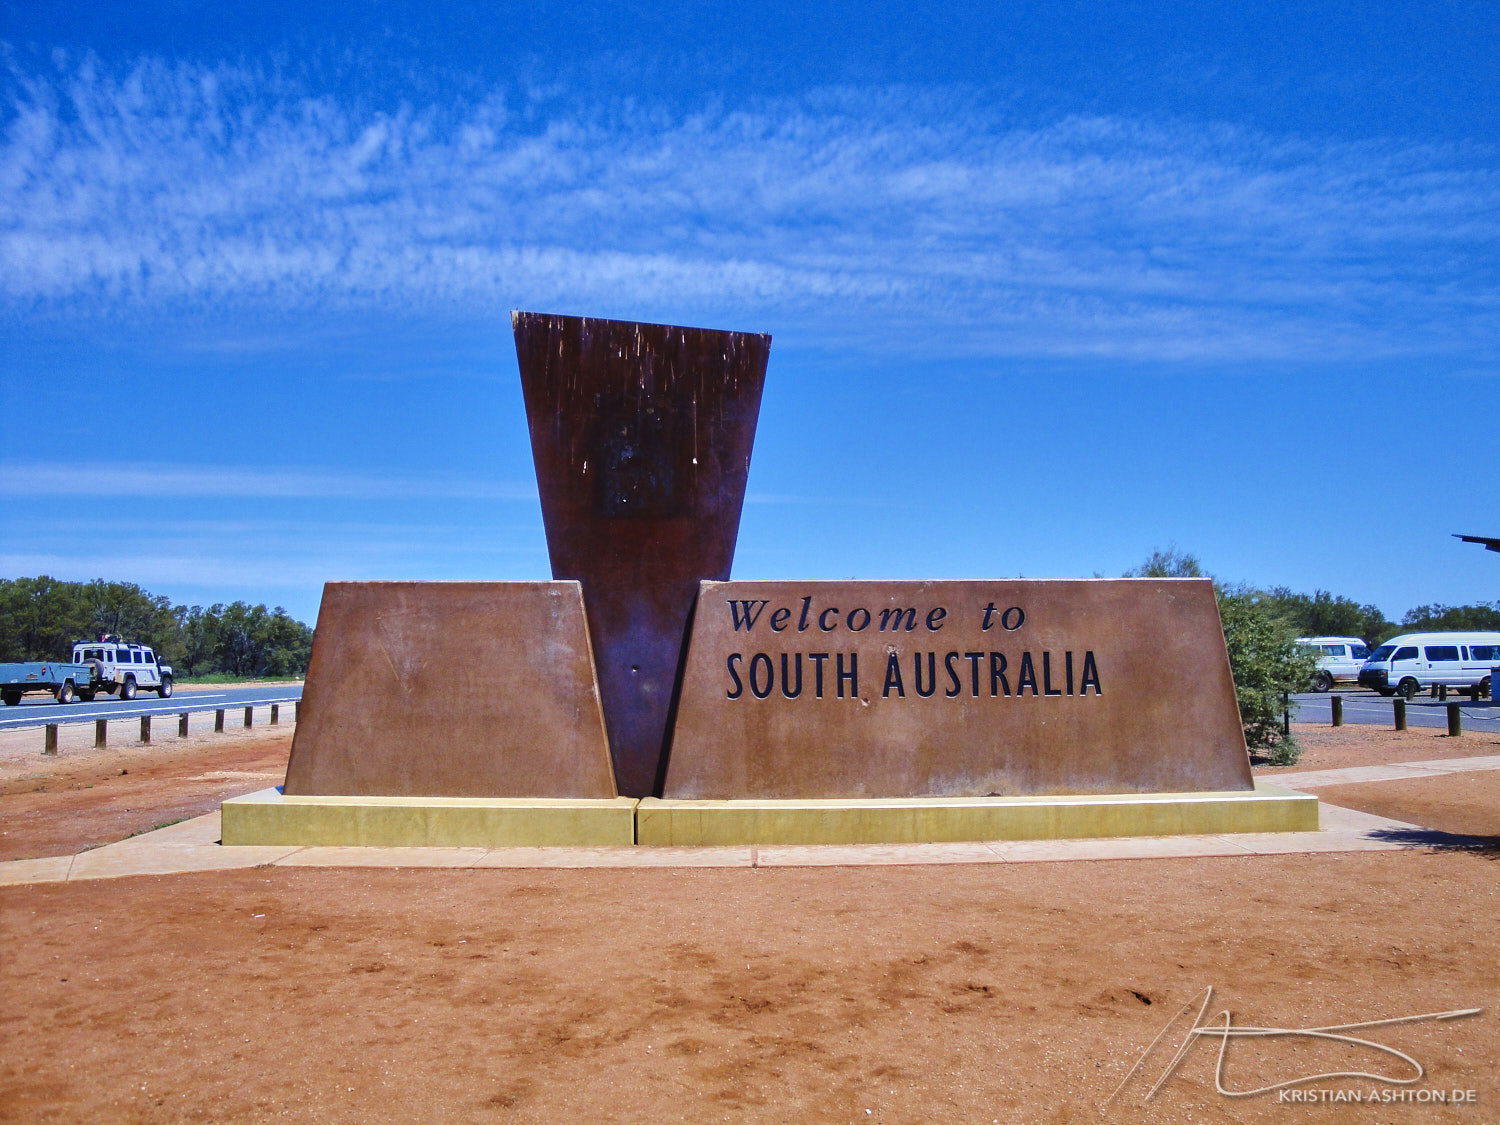 The border between the Northern Territory and South Australia